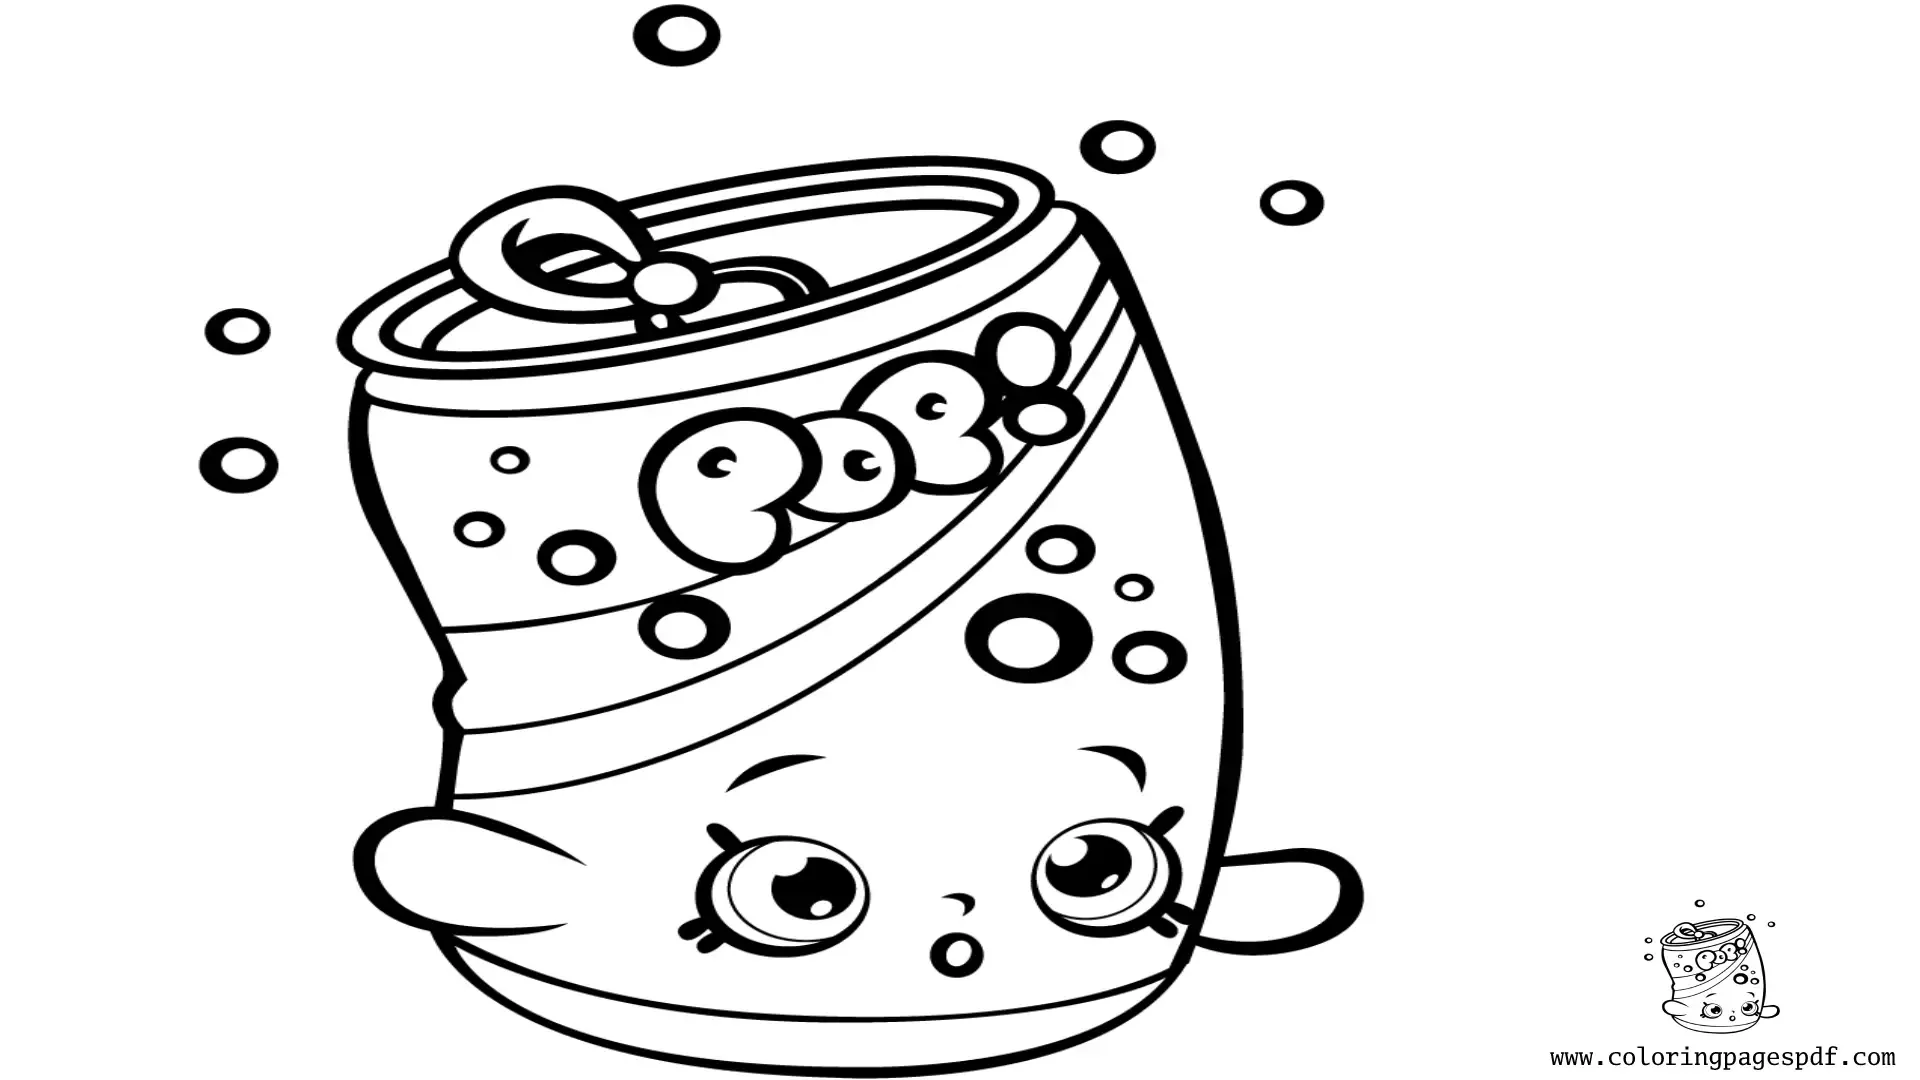 Coloring Page Of Soda Pops